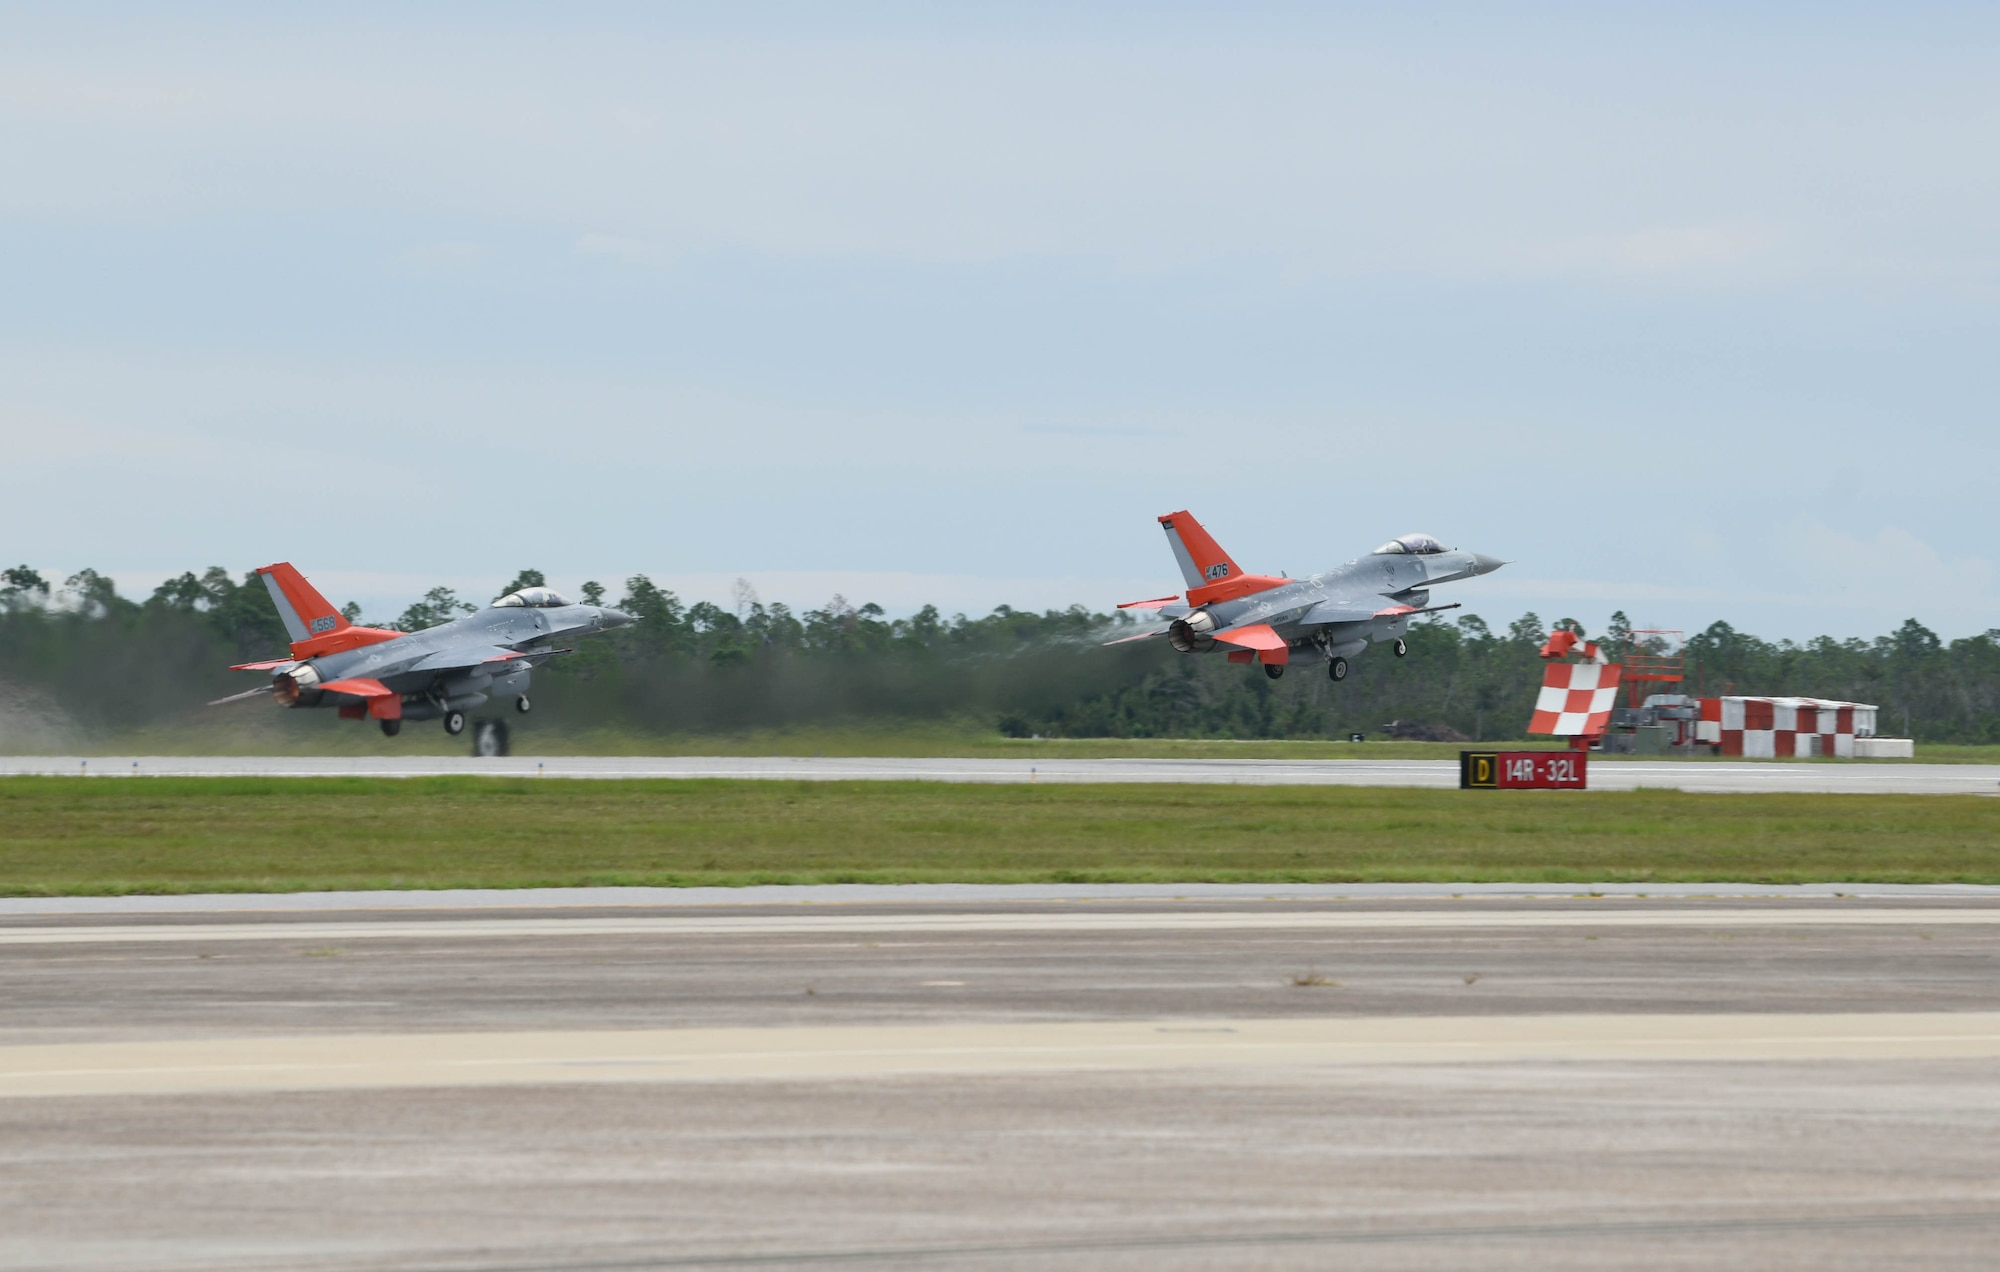 Two QF-16s from the 82nd Aerial Targets Squadron take off from Tyndall Air Force Base, Florida, Aug. 21, 2020. The aircraft evacuated from the 325th Fighter Wing’s airfield to Shaw Air Force Base, South Carolina, due to the possibility of severe weather conditions. (U.S. Air Force photo by Airman Anabel Del Valle)